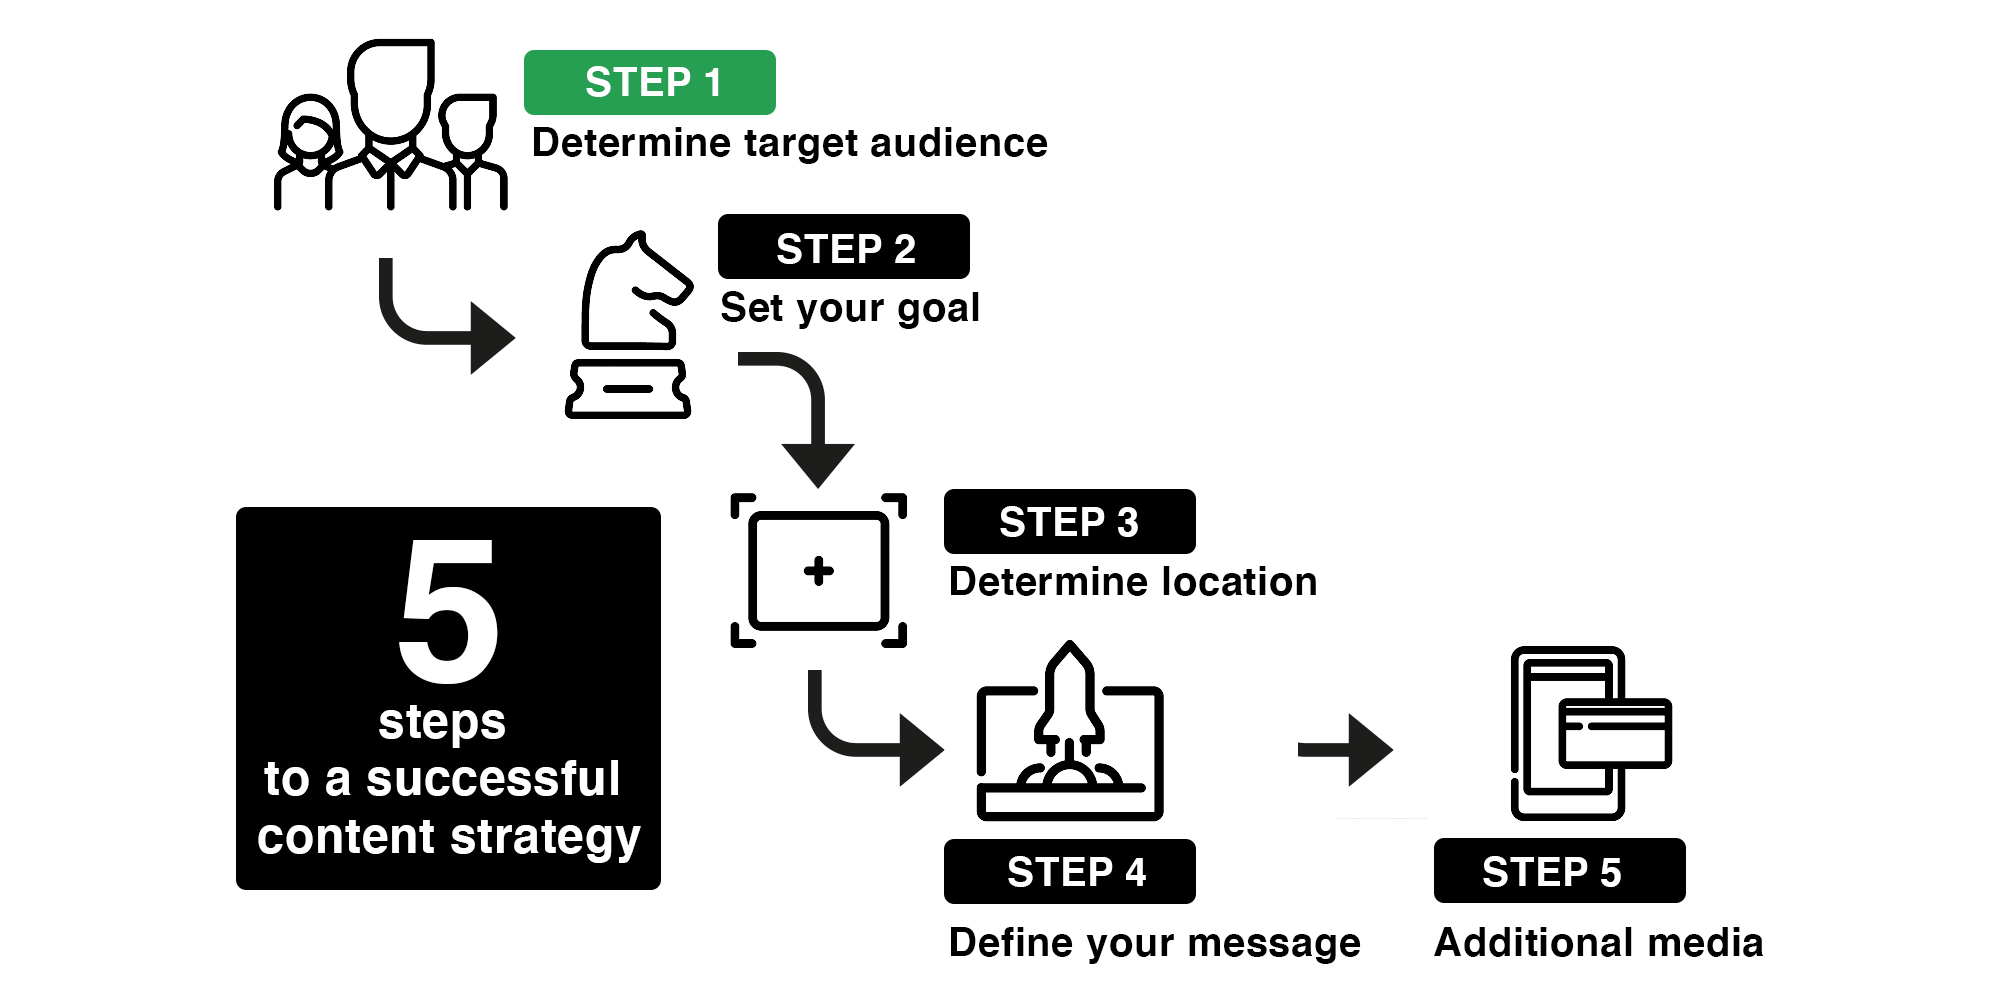 Step 1 of creating a Content Strategy in 5 steps